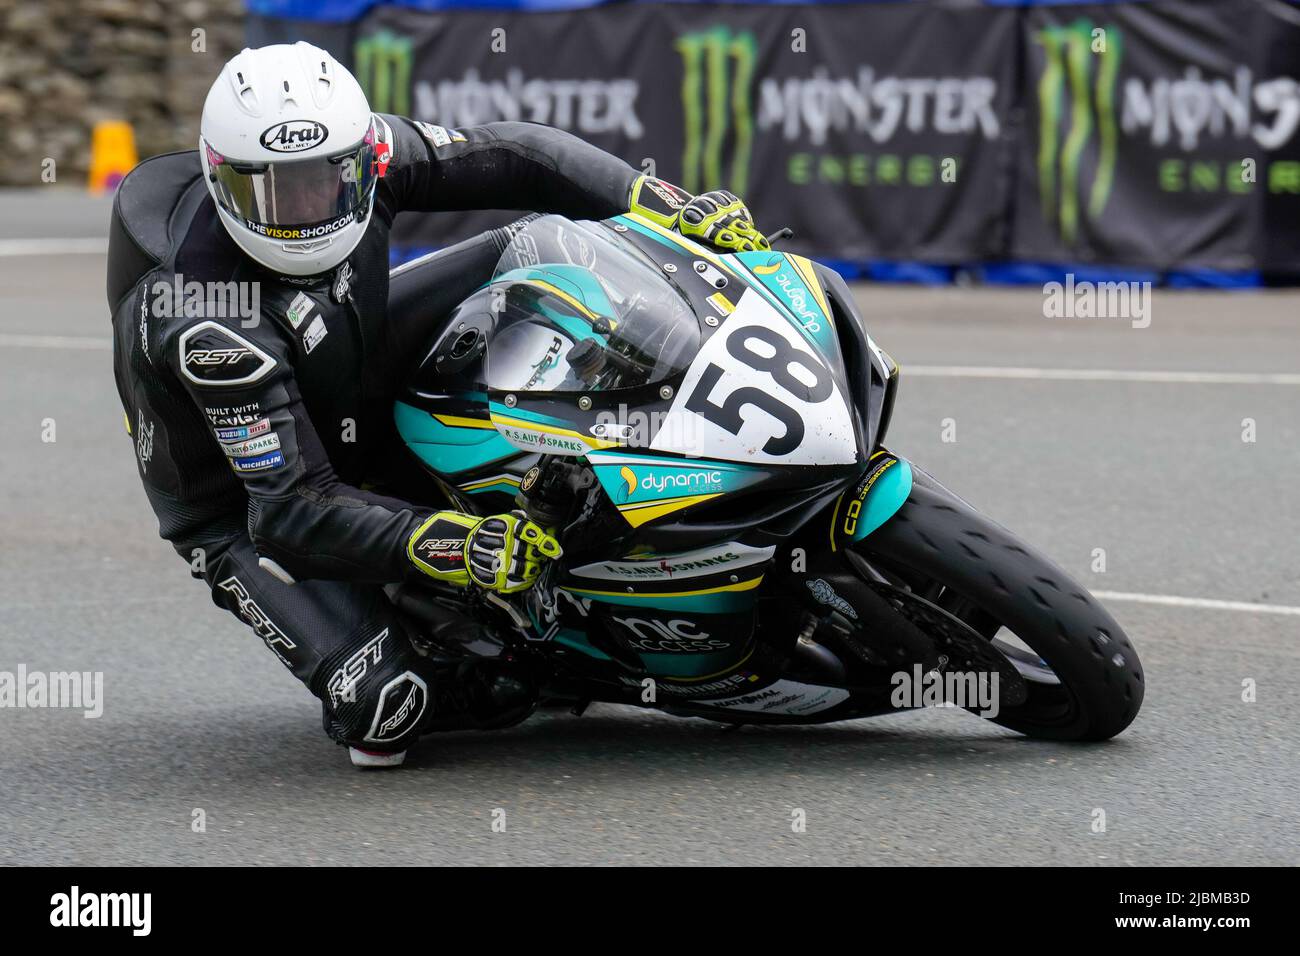 Douglas, Isle Of Man. 19th Jan, 2022. Sam Johnson (600 Suzuki) representing  the RS Auto Sparks/Millennium Power/Dynamic Access team during the Monster  Energy Supersport TT Race 1 at the Isle of Man,